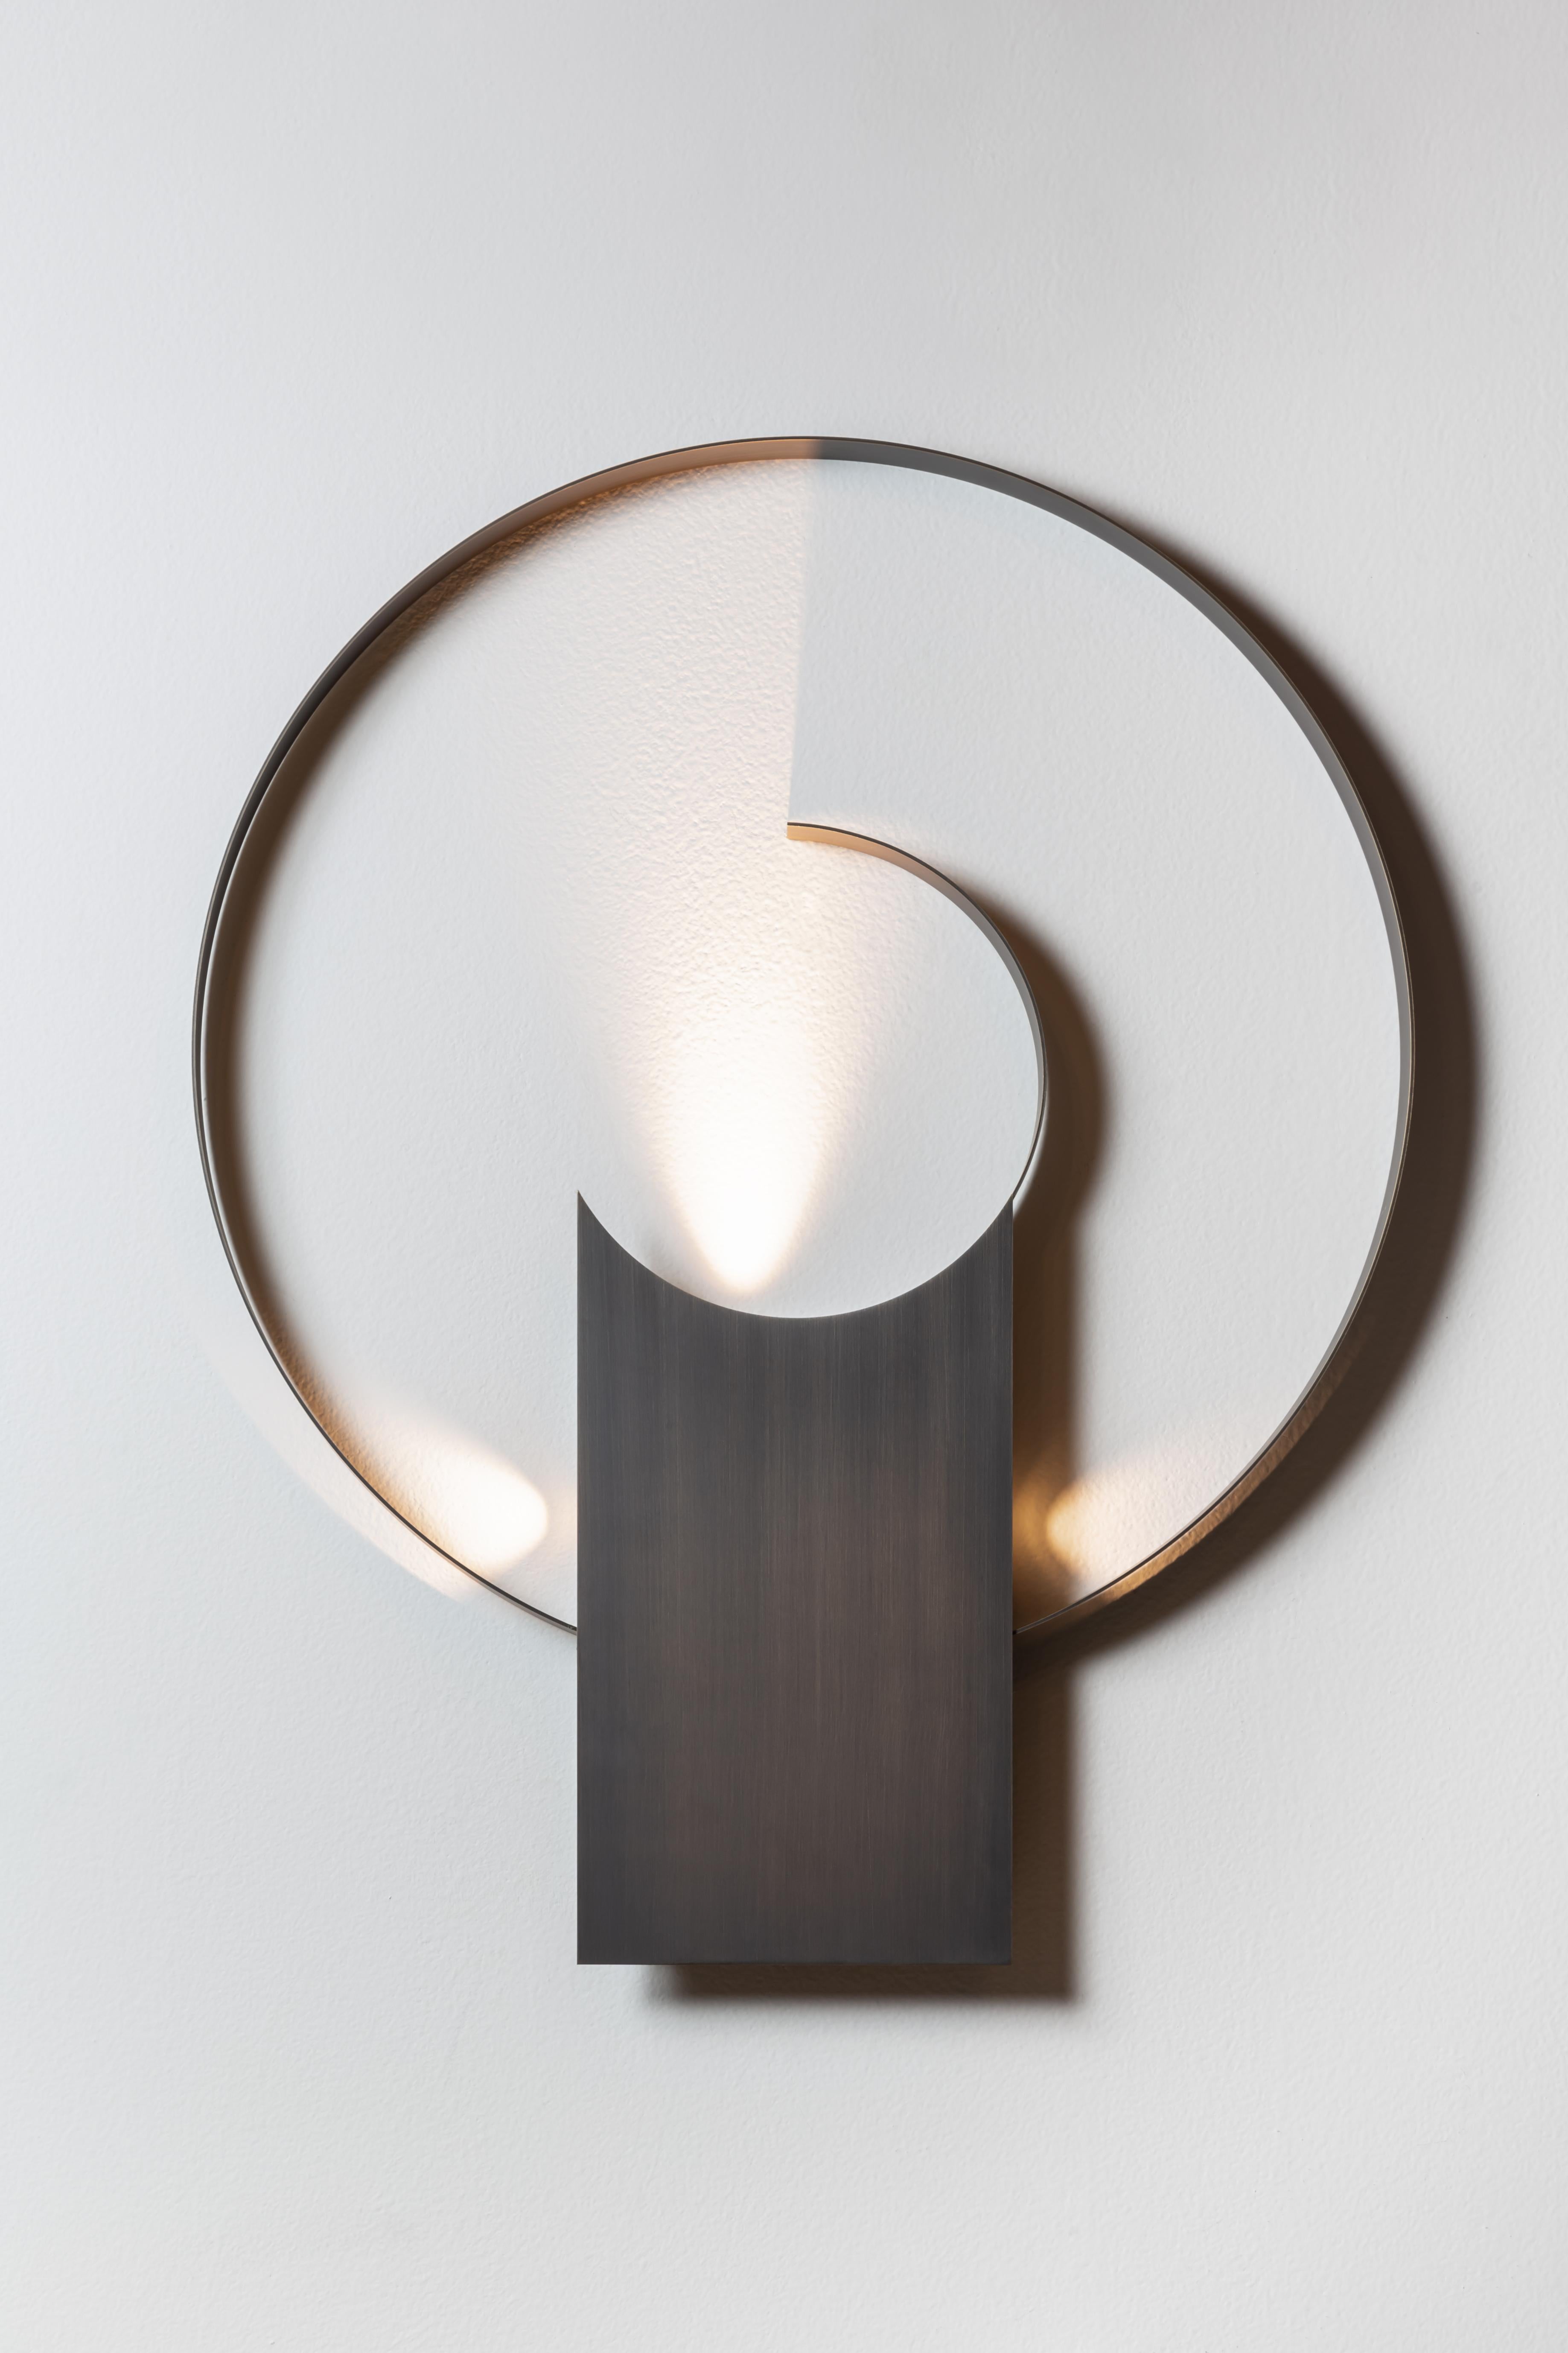 Laghee Luna Wall Light by Luce Tu
Limited Edition of 100 pieces.
Dimensions: D 74,4 x W 60 x H 74,4 cm.
Materials: Brass.

All our lamps can be wired according to each country. If sold to the USA it will be wired for the USA for instance.